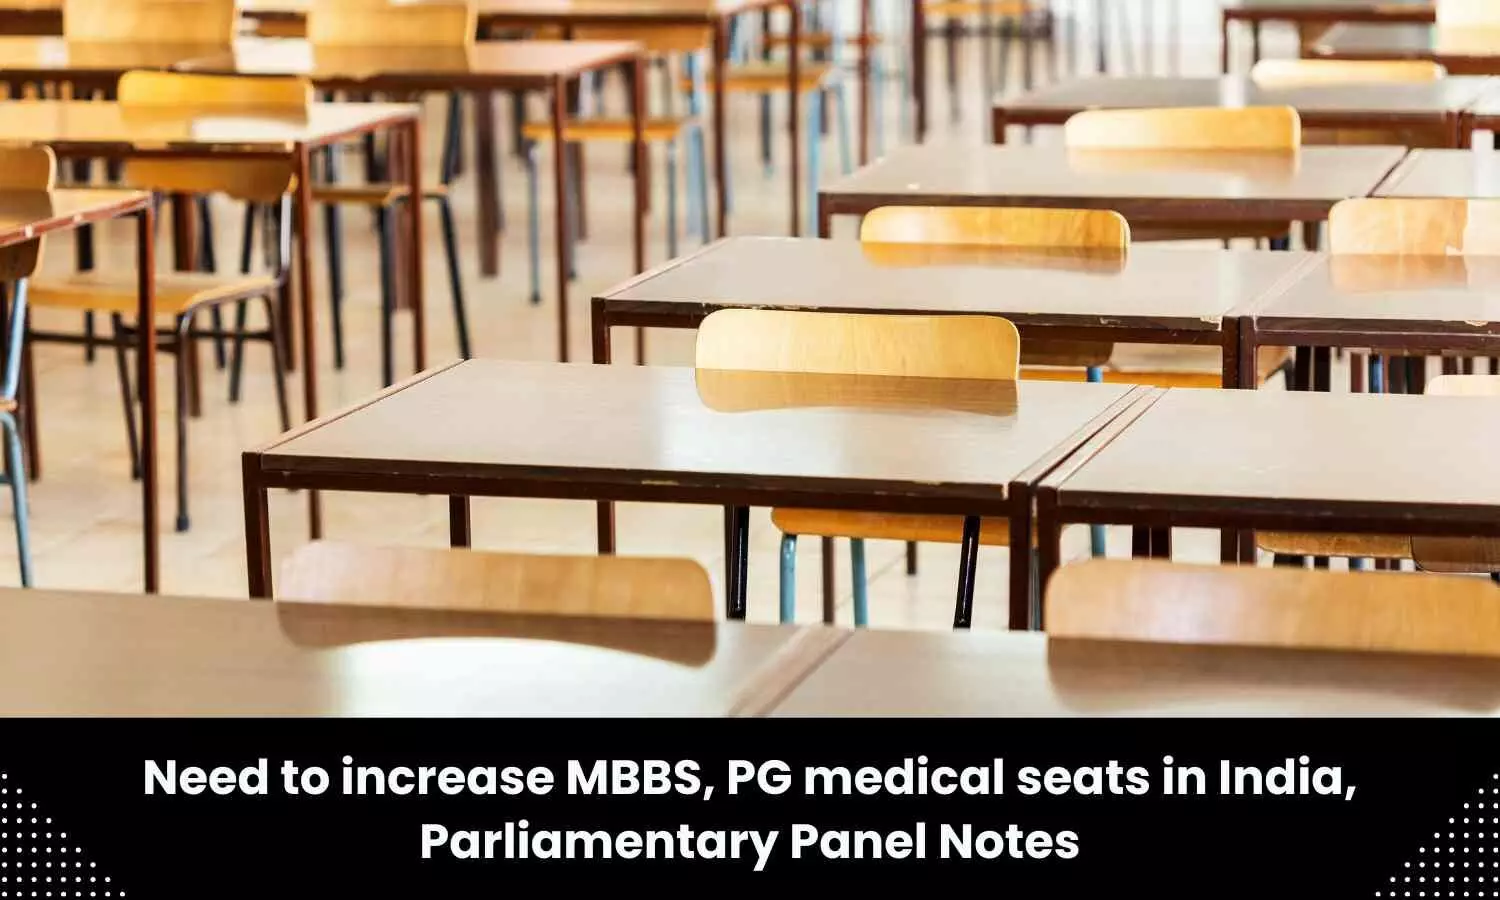 Need to increase MBBS, PG medical seats in India: Parliamentary Panel